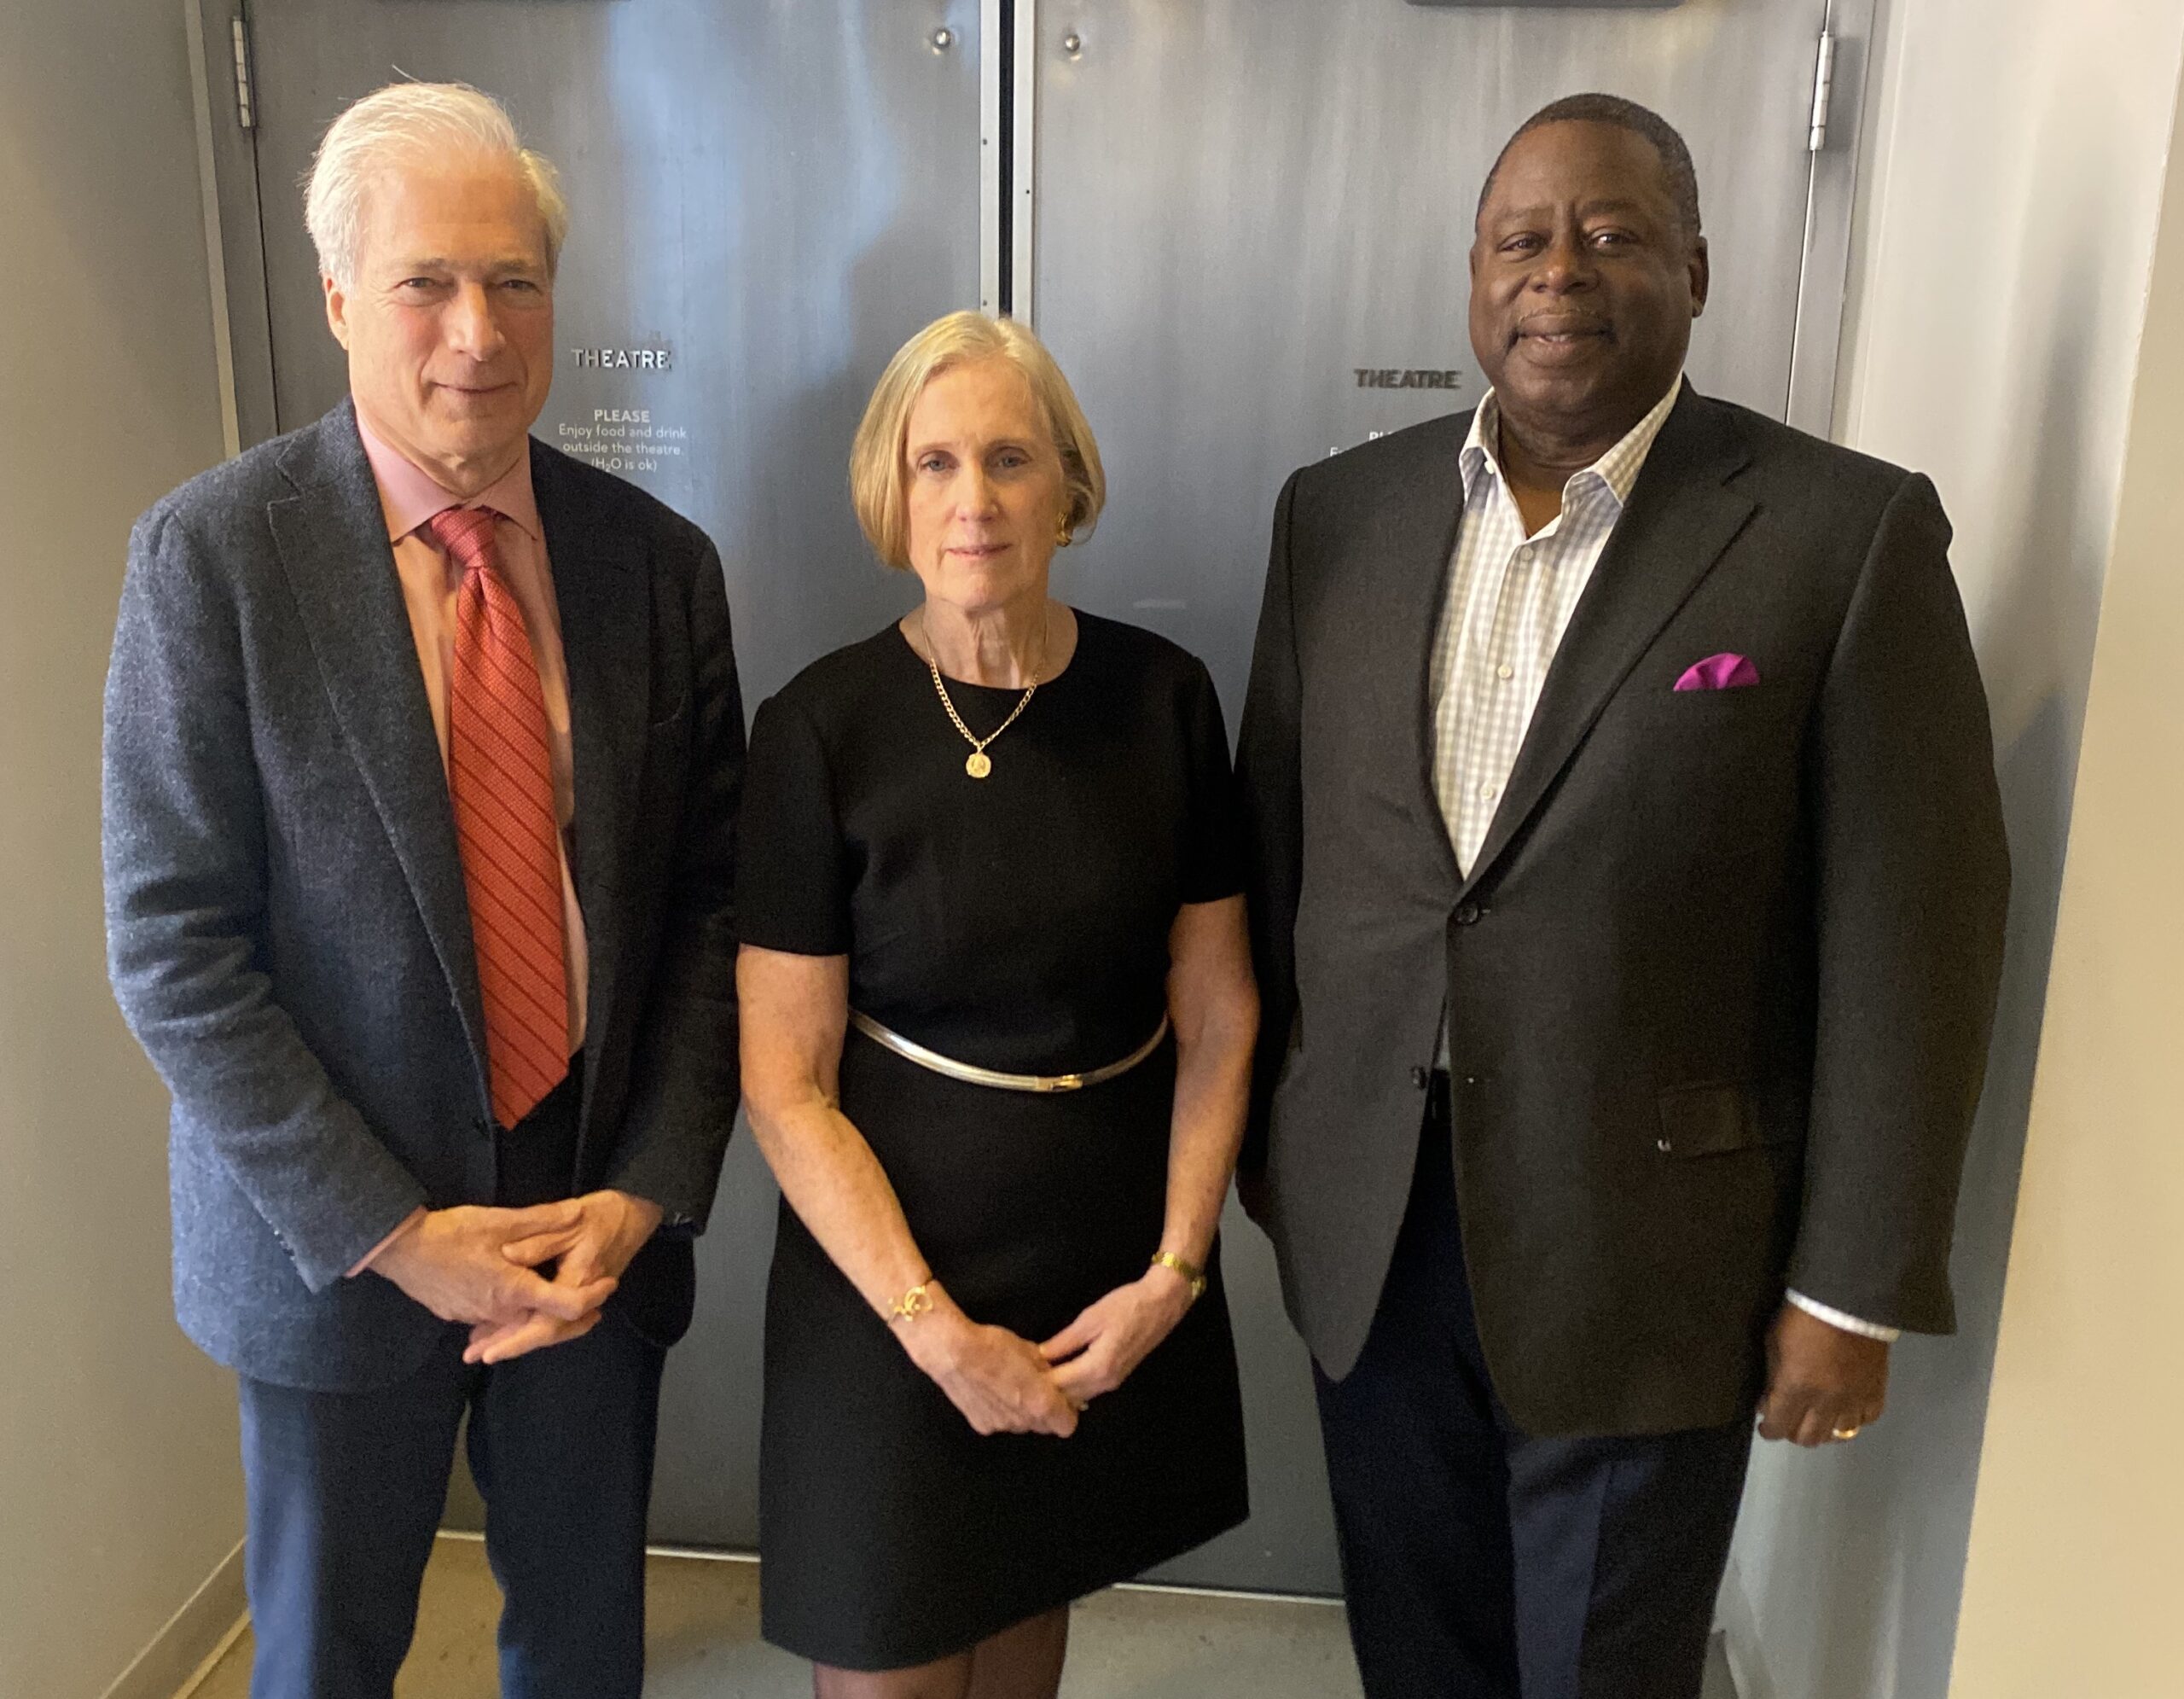 NYC Special Narcotics Prosecutor Bridget G. Brennan (center) discussed the Fentanyl crisis in NYC. CCC President Richard Aborn (left) and Chairman Lewis Rice (right). Mr. Aborn and Ms. Brennan have their hands clasped in front of them.